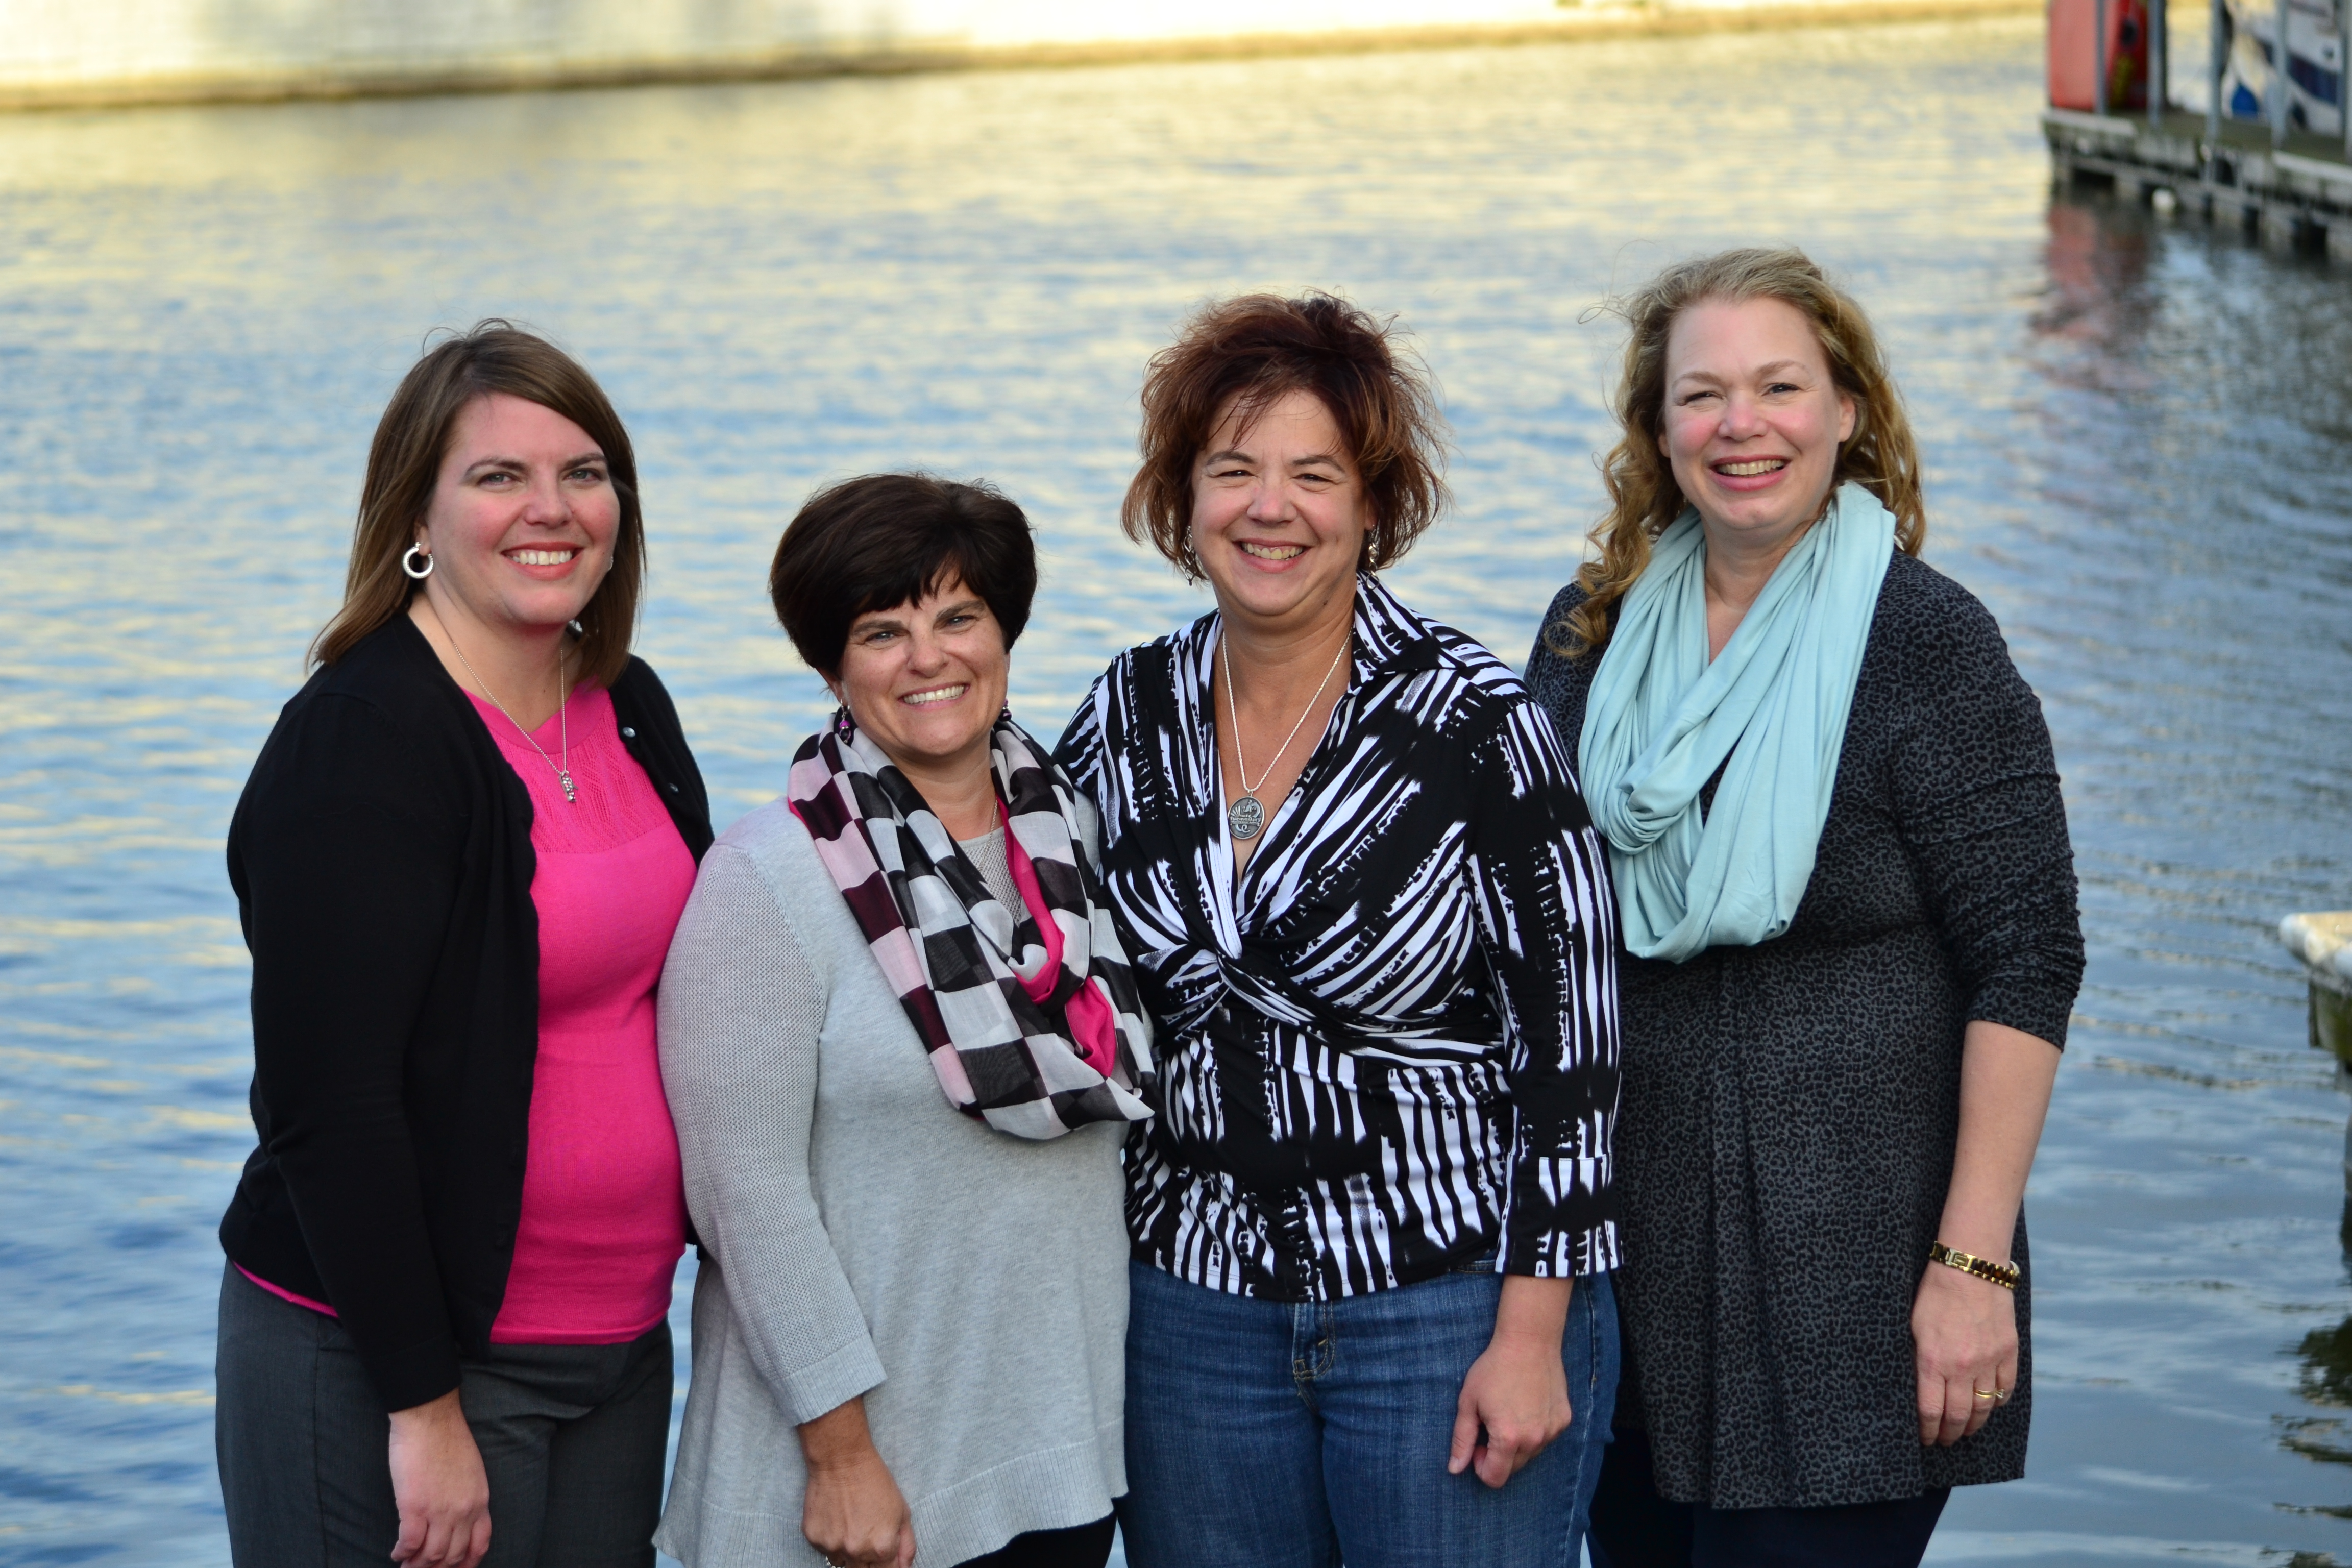 From left, Elizabeth Anderson, Yopi Havlik, Sarah Demmon, and Lori Goldsby, all Fishers residents and breast cancer survivors. They are in different stages of recovery and each wrote a very personal letter to their cancer. (Photo by John Cinnamon)